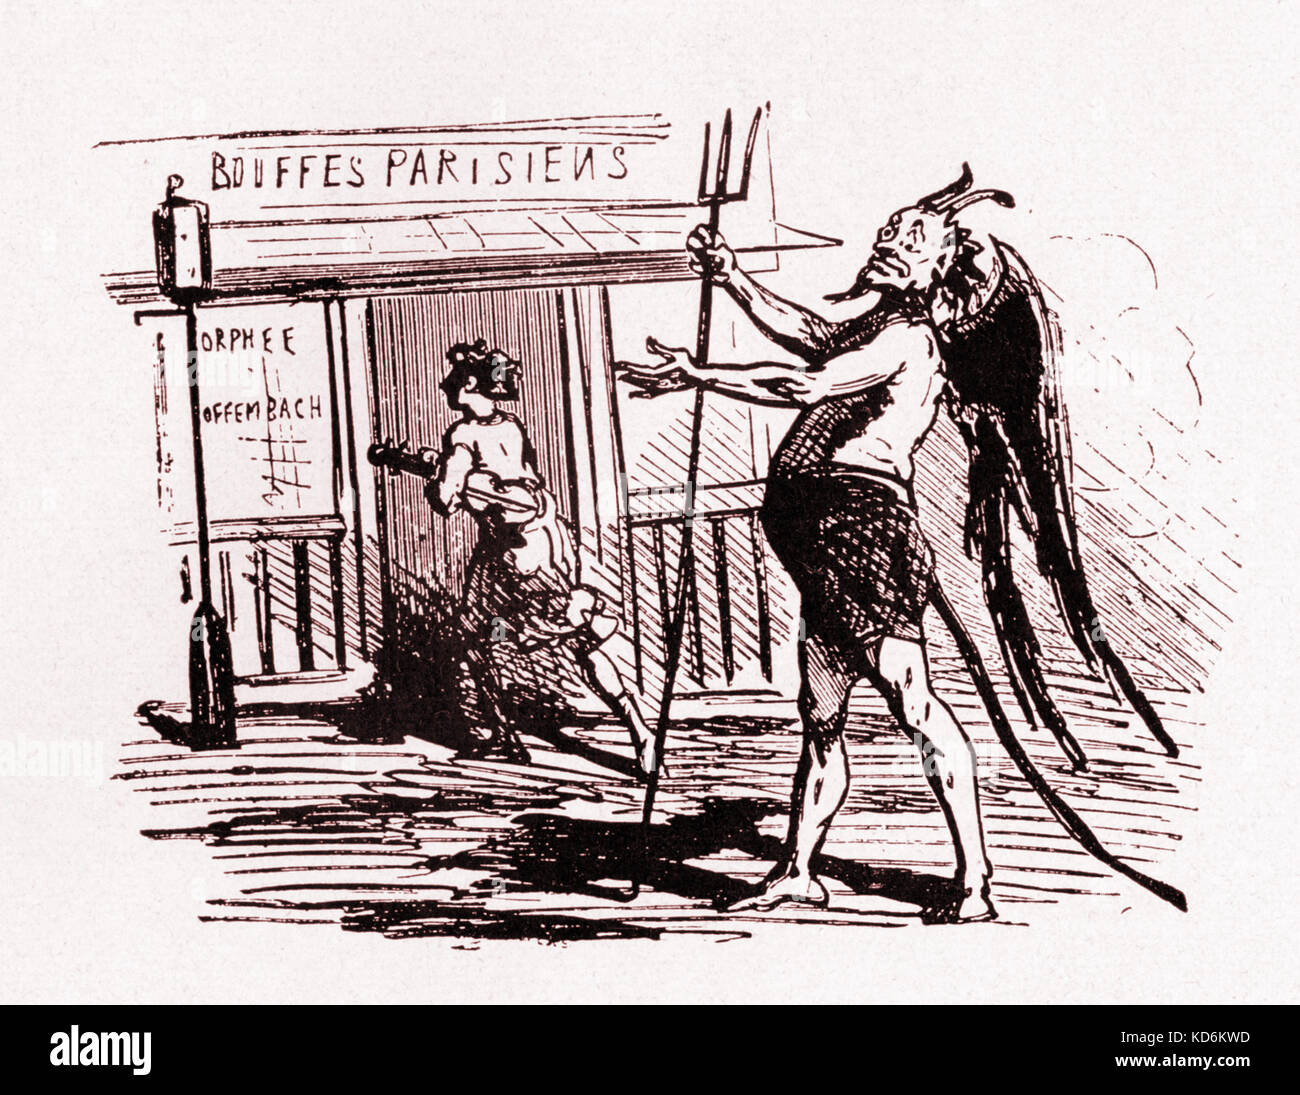 Jacques Offenbach - Orfée aux Enfers Caricature showing Pluto stranded outside Bouffes Parisiens, while Orpheus marches in with violin under arm. German/French composer, 20 June 1819 - 5 October 1880. Stock Photo